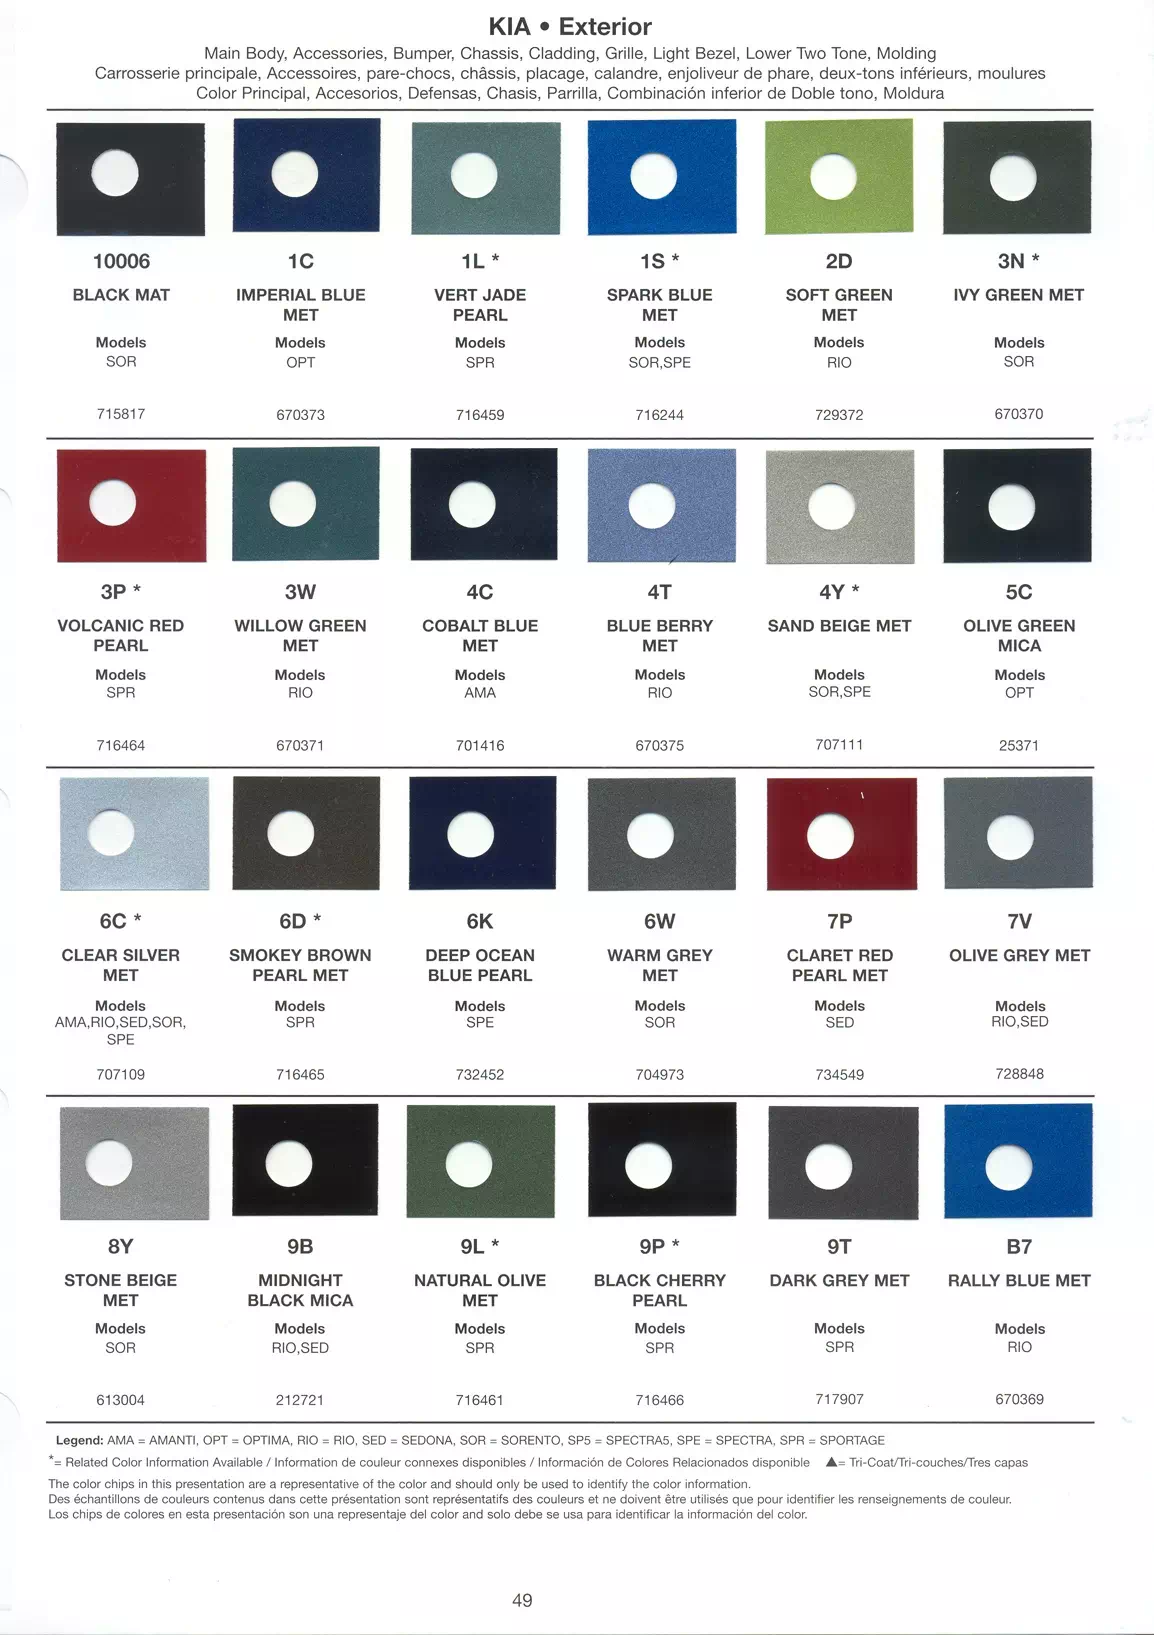 Exterior Paint Colors for Kia Vehicles in 2006